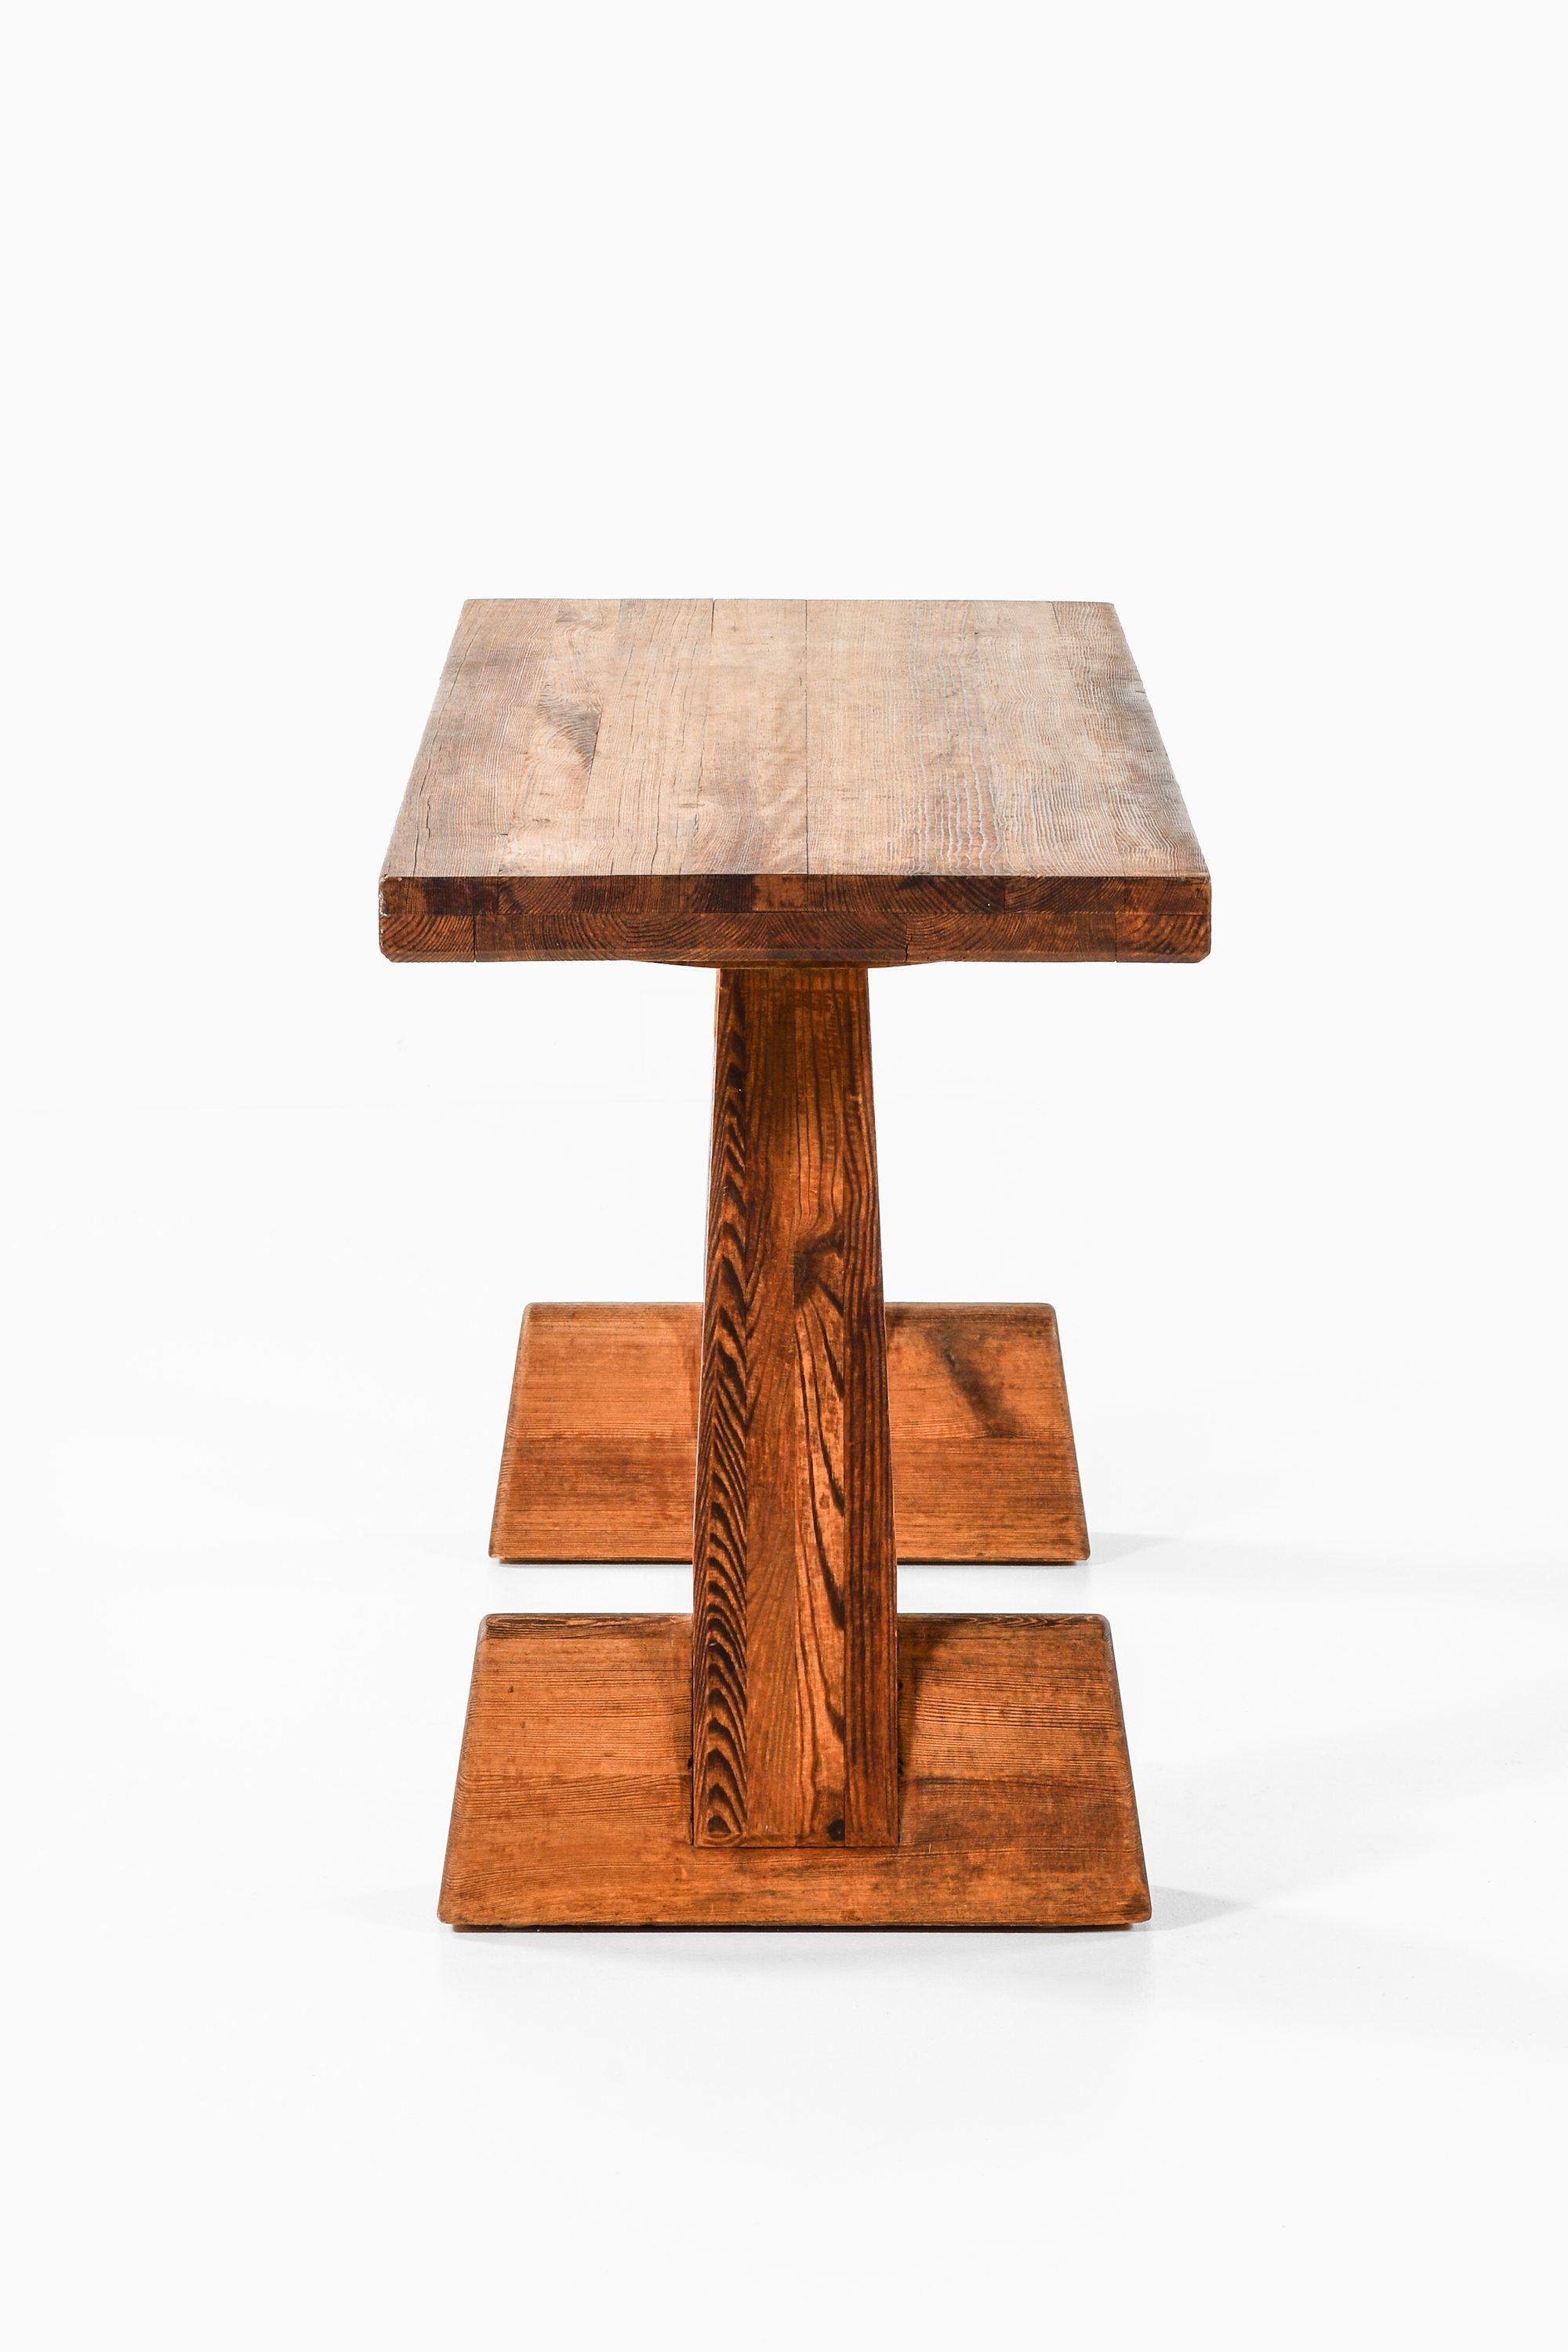 Scandinavian Modern Library / Console Table in Acid-Stained Pine by Axel Einar Hjorth, 1932 For Sale